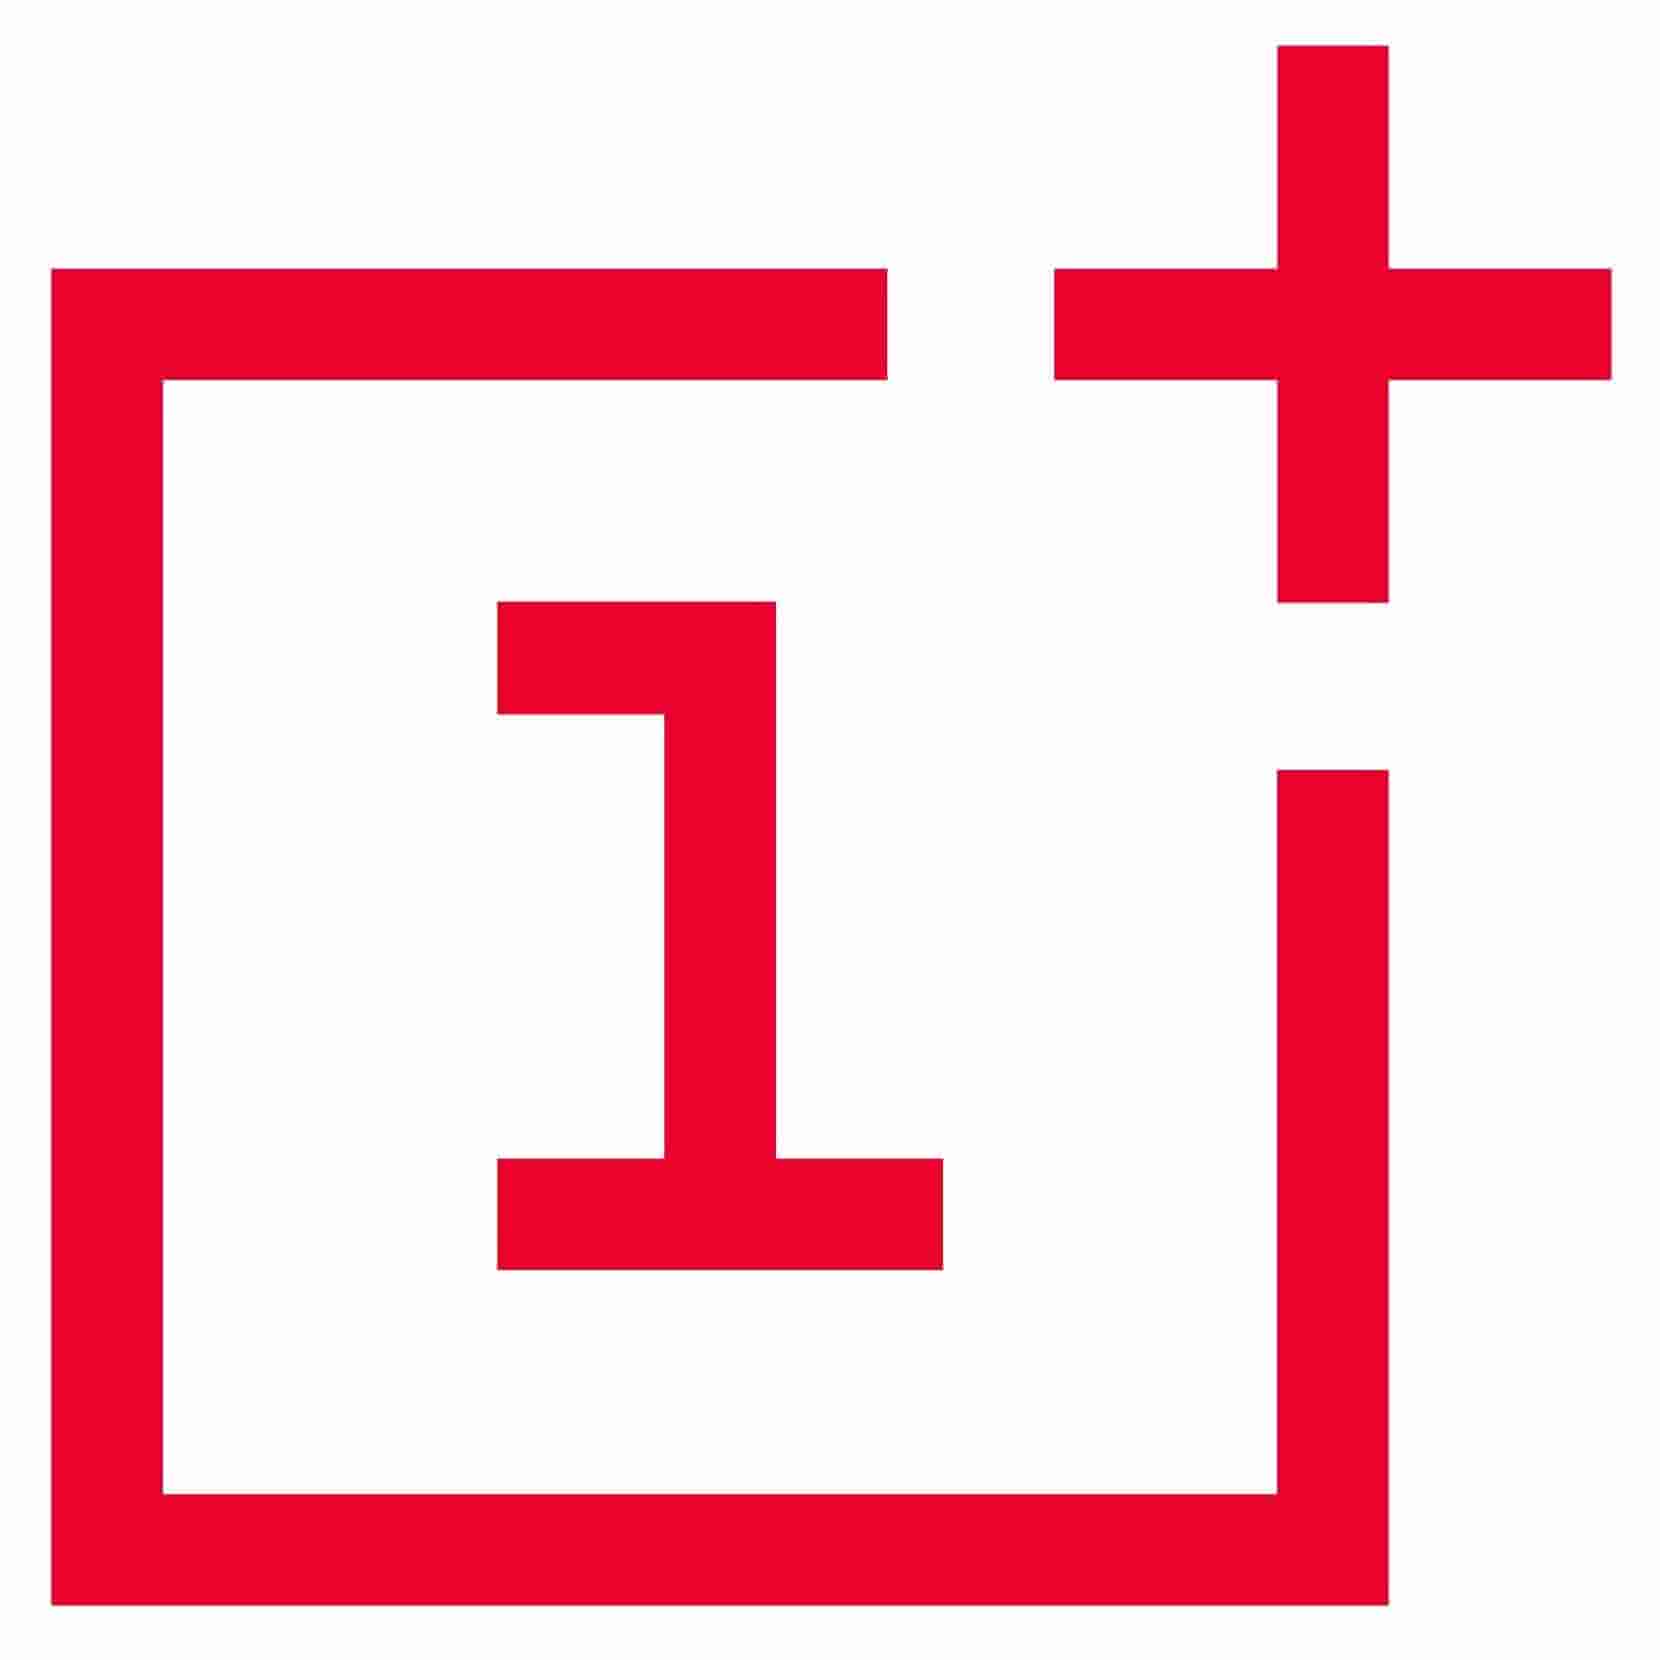 Oneplus Products list,one plus product list